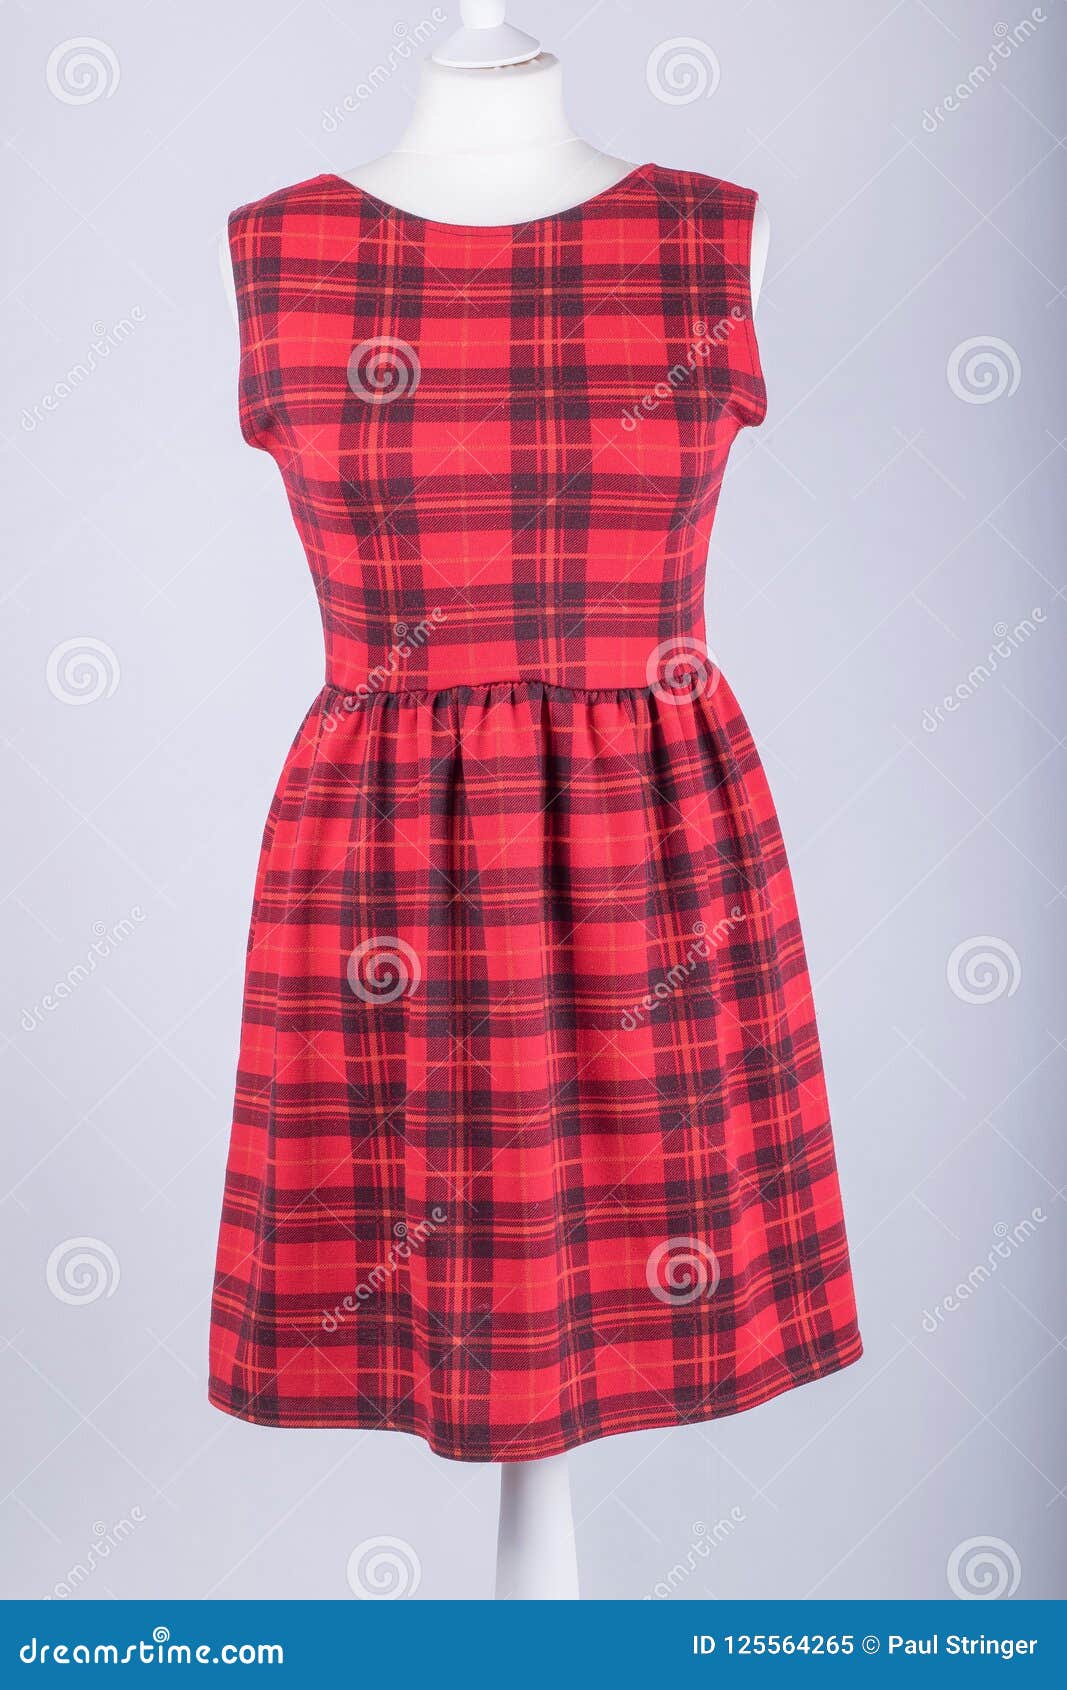 Tailors Mannequin Dressed in a Red Tartan Dress Stock Image - Image of ...